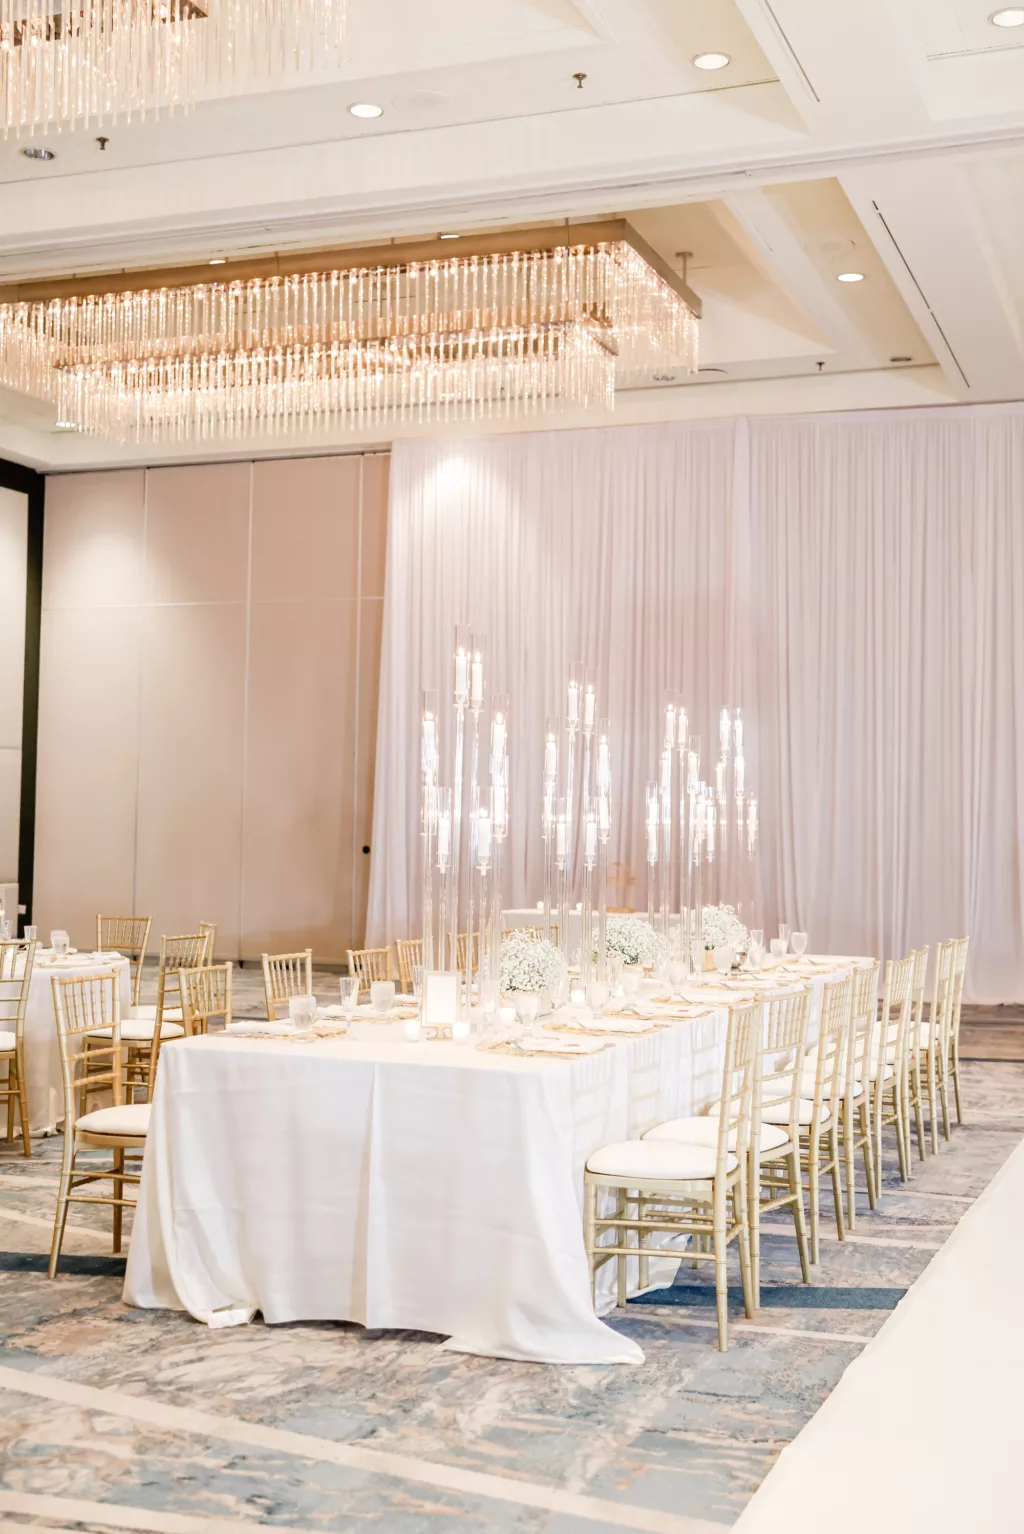 Extravagant Ivory, White, and Gold Wedding Reception Feasting Table Tablescape Decor Inspiration | Tall Modern Acrylic Candelabra Centerpiece Ideas | Gold Chiavari Chairs | Tampa Bay Hotel Venue Hilton Tampa Downtown | Planner Special Moments Event Planning